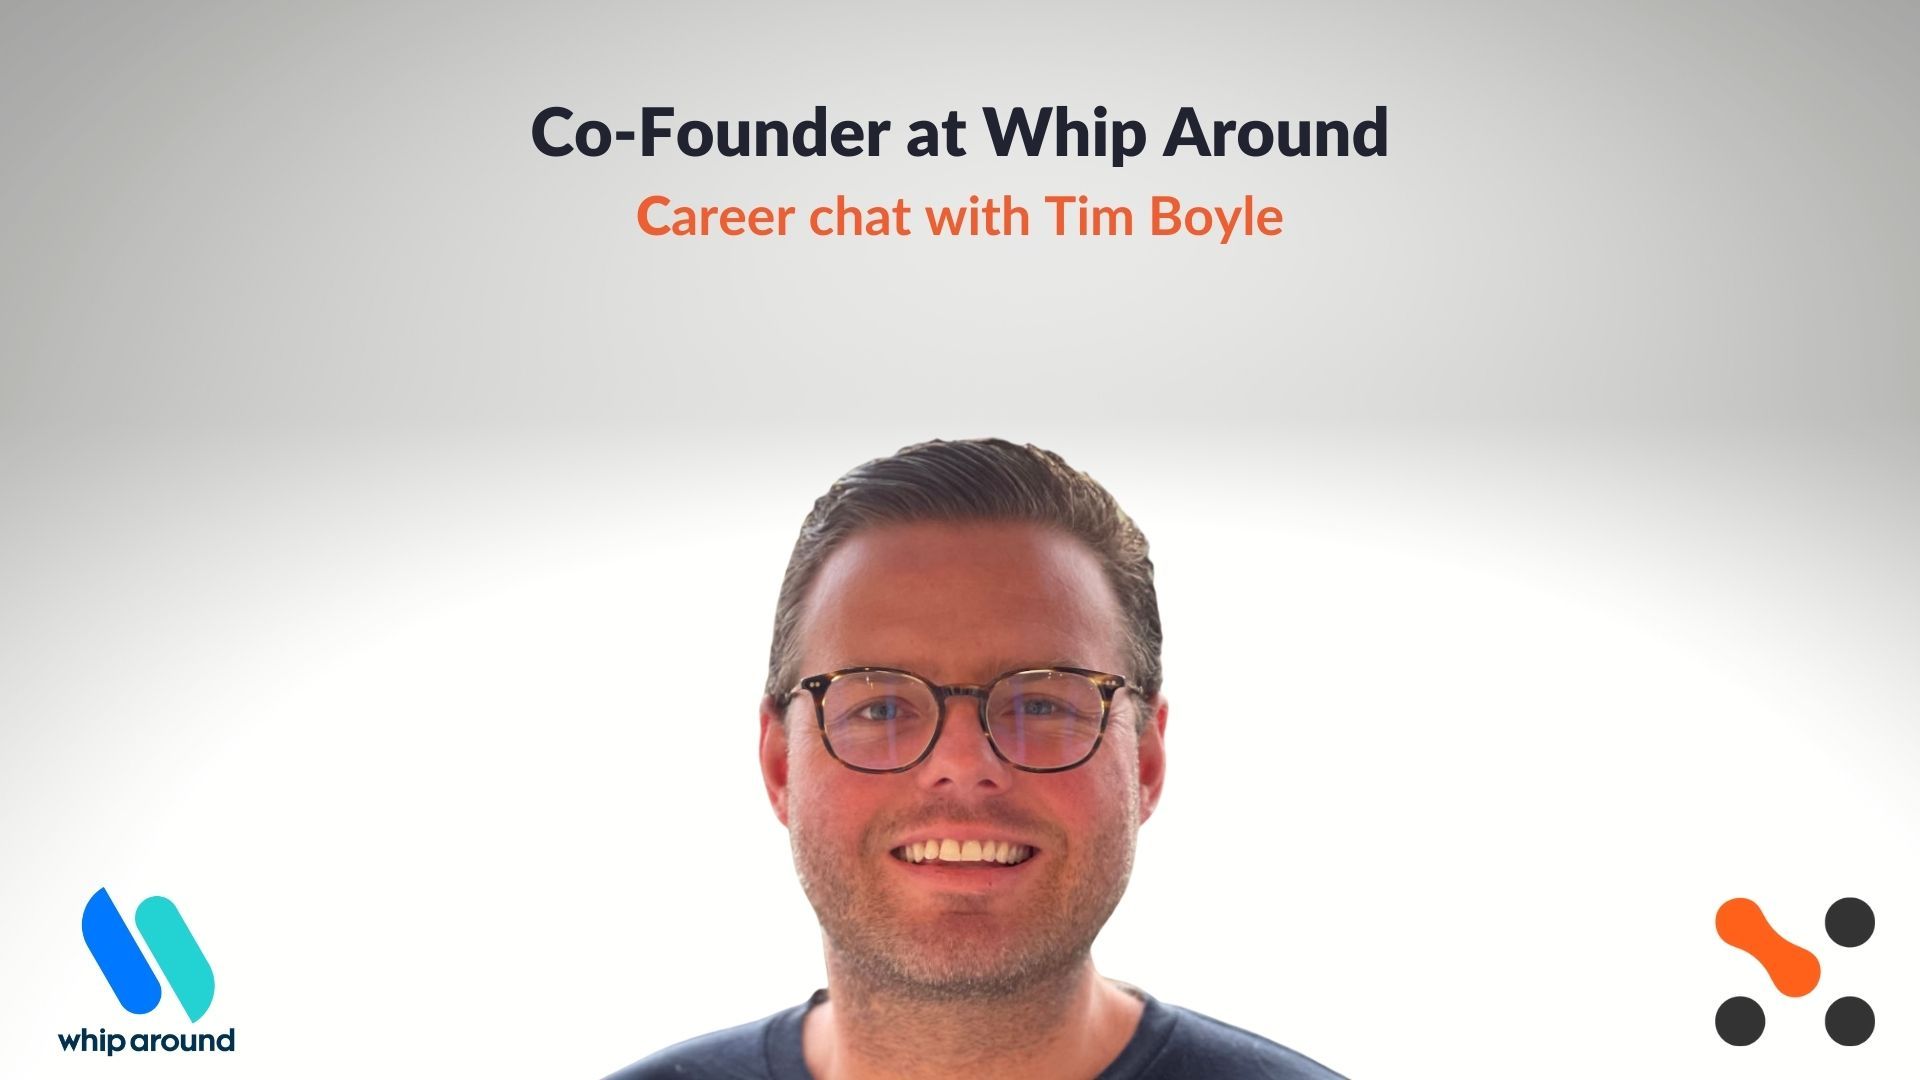 Career-chat-with-Tim-Boyle-Co-Founder-at-Whip-Around.jpg